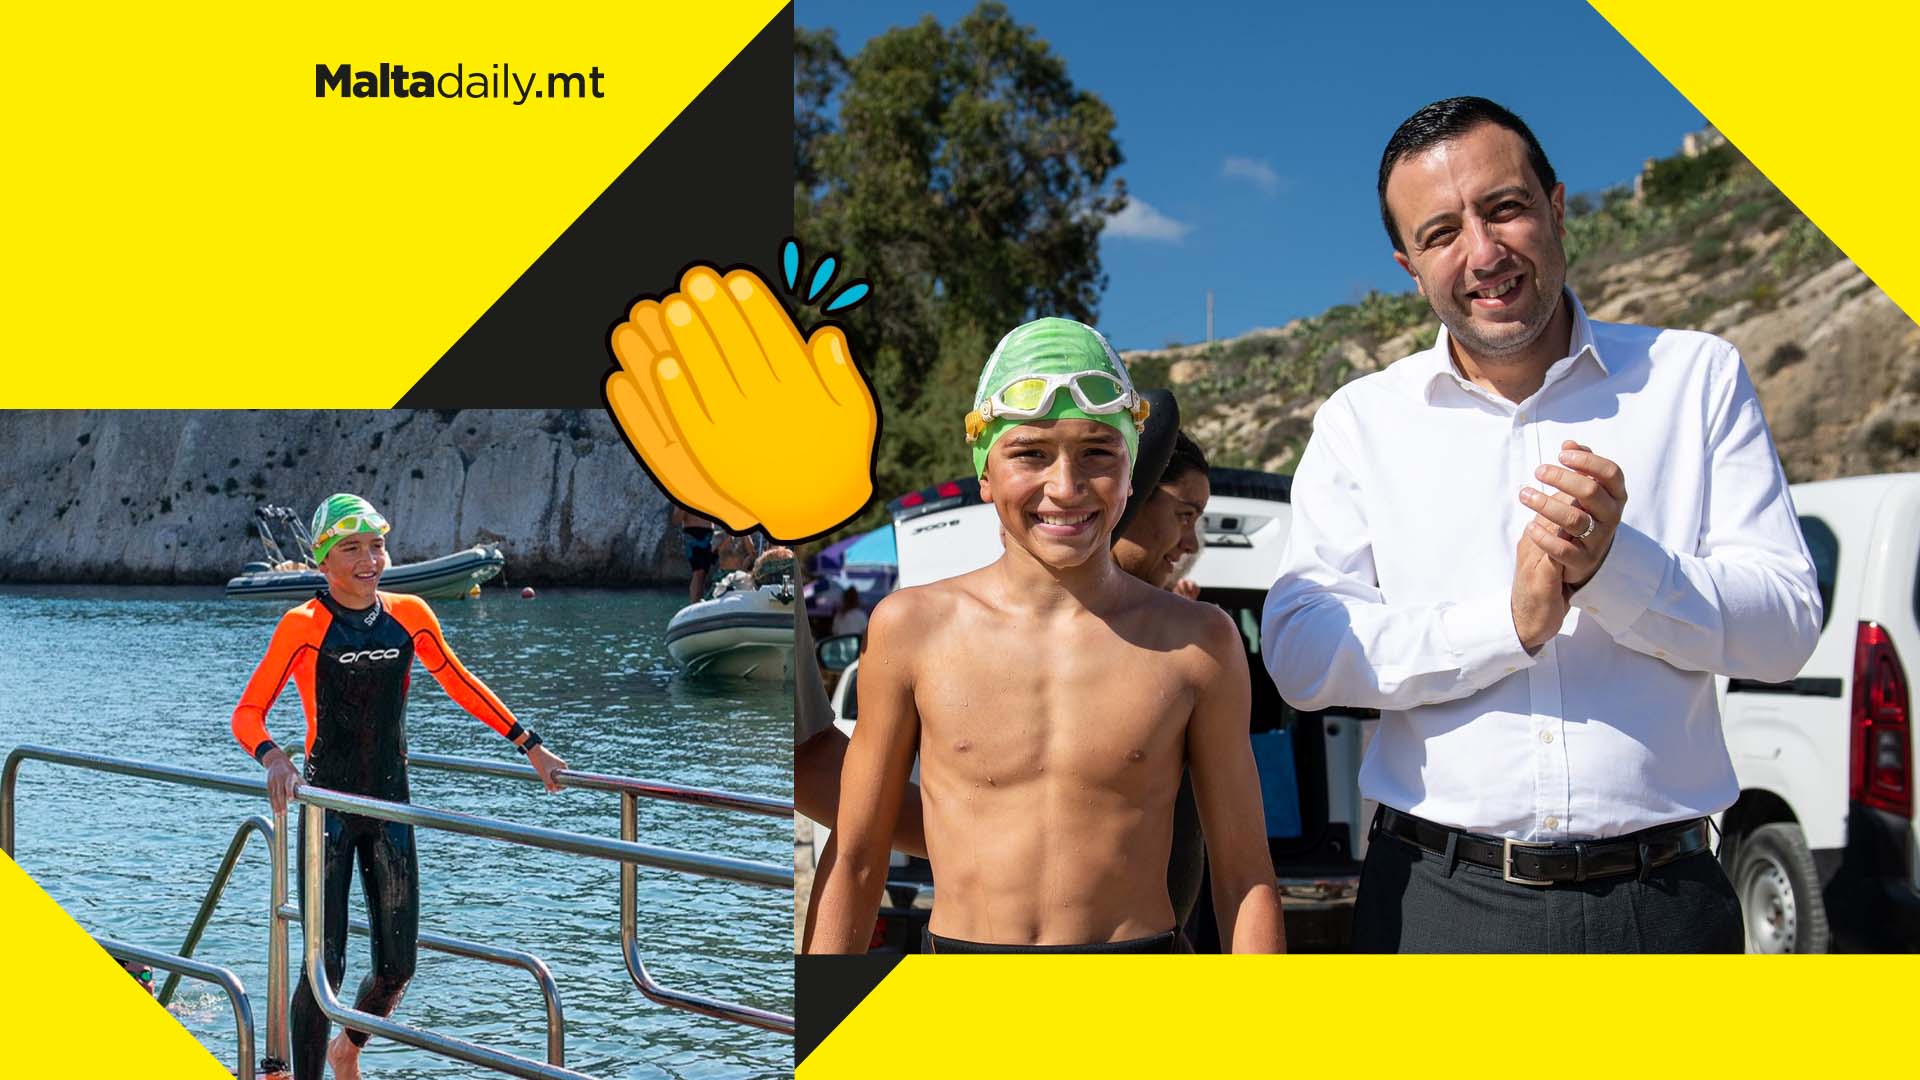 11 year old Liam swims 7km to raise awareness about plastic pollution